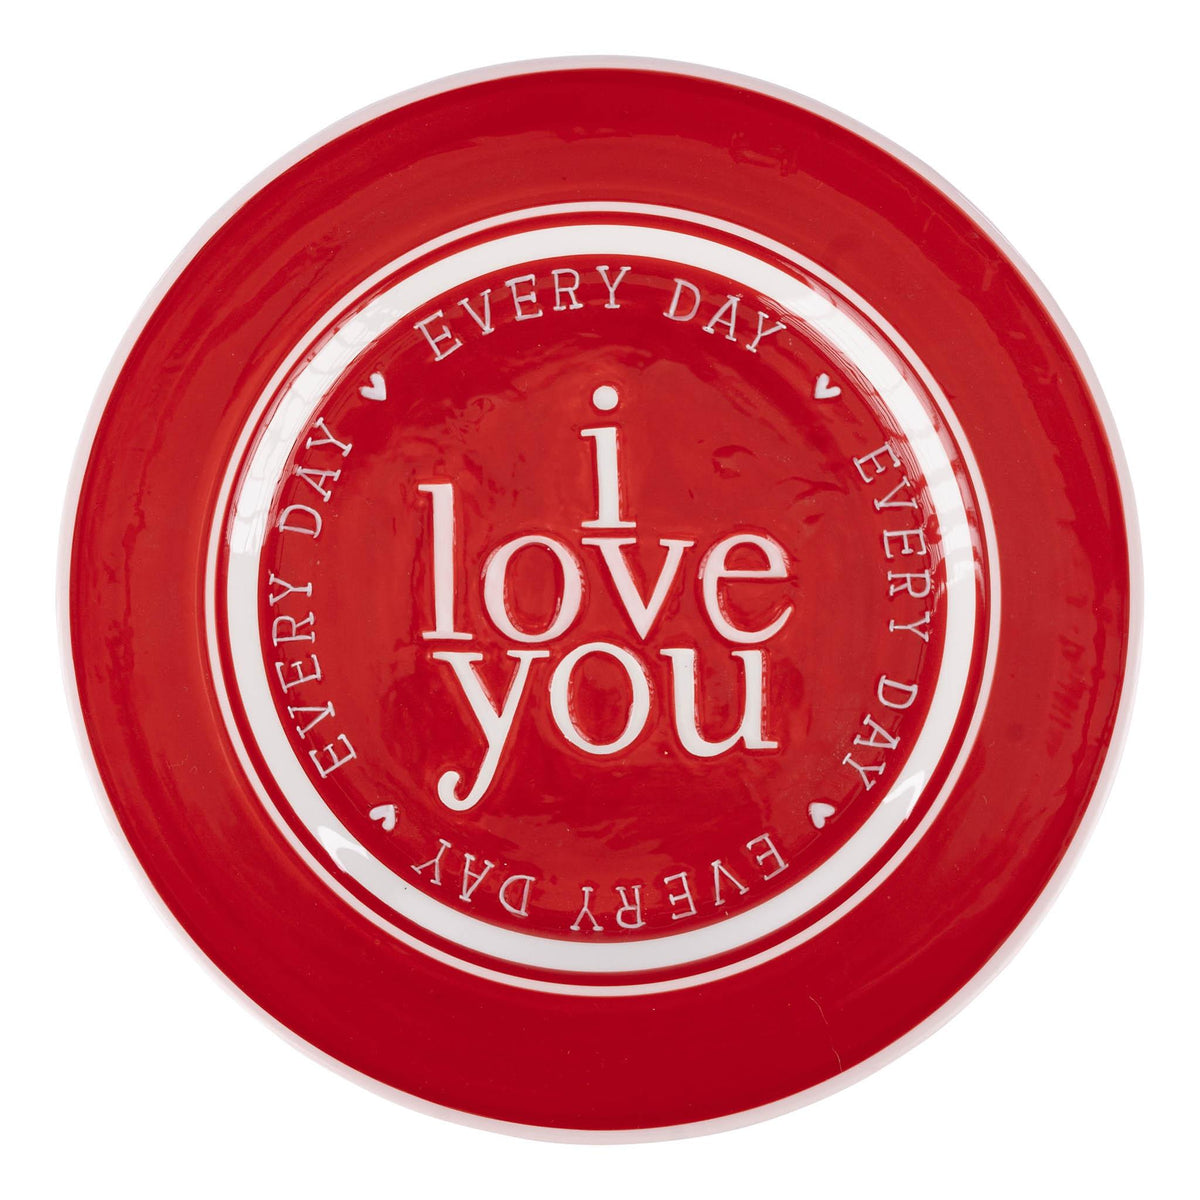 Red Everyday Love You Plate - GLORY HAUS 